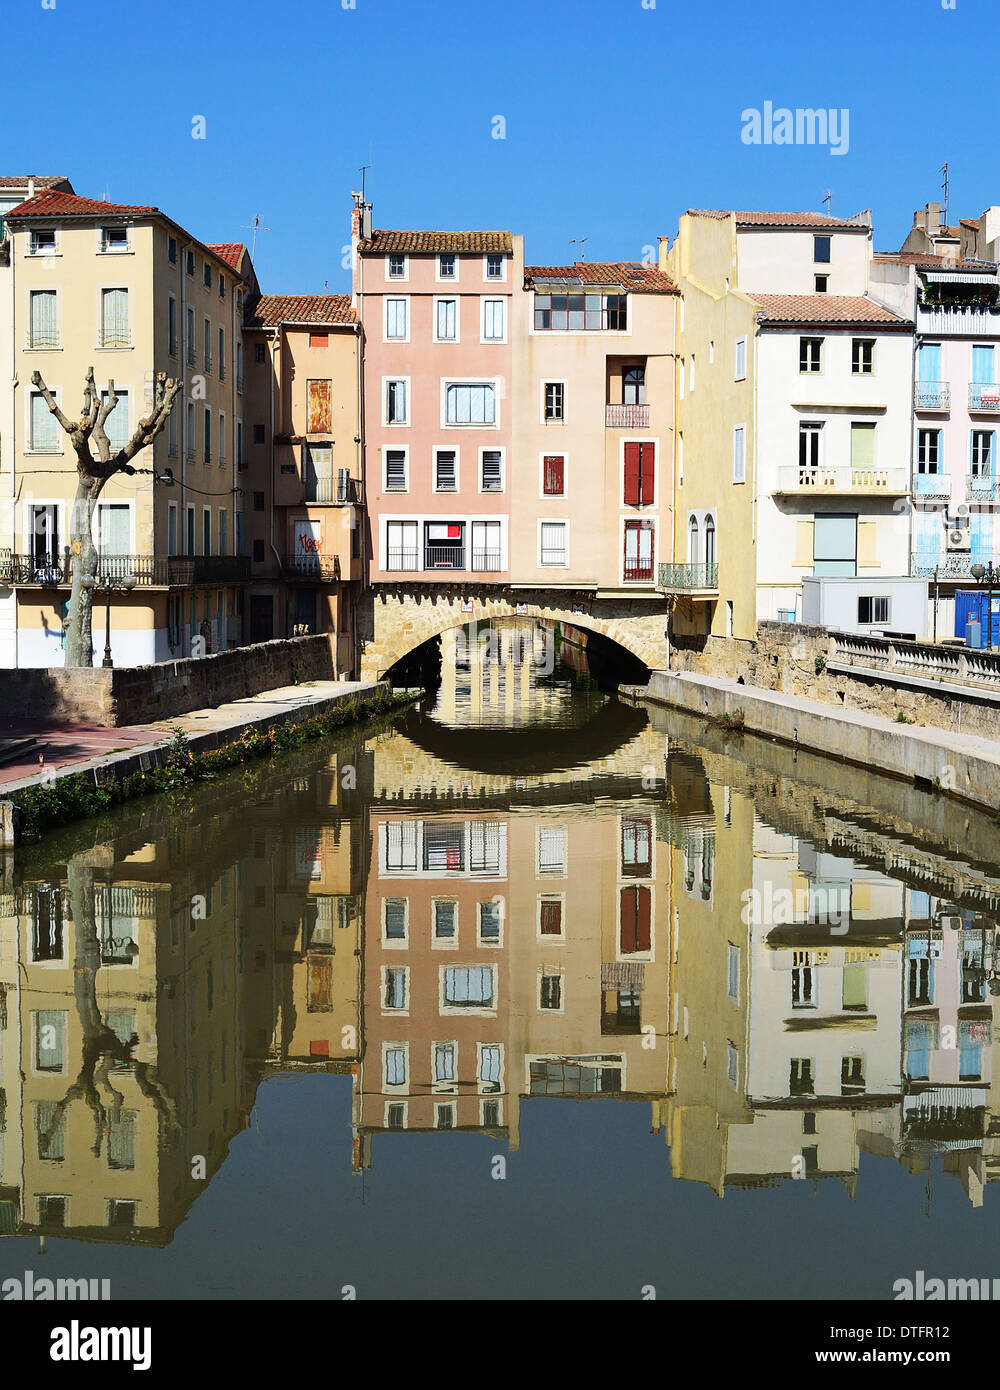 Colorfull building in Narbonne, France Stock Photo